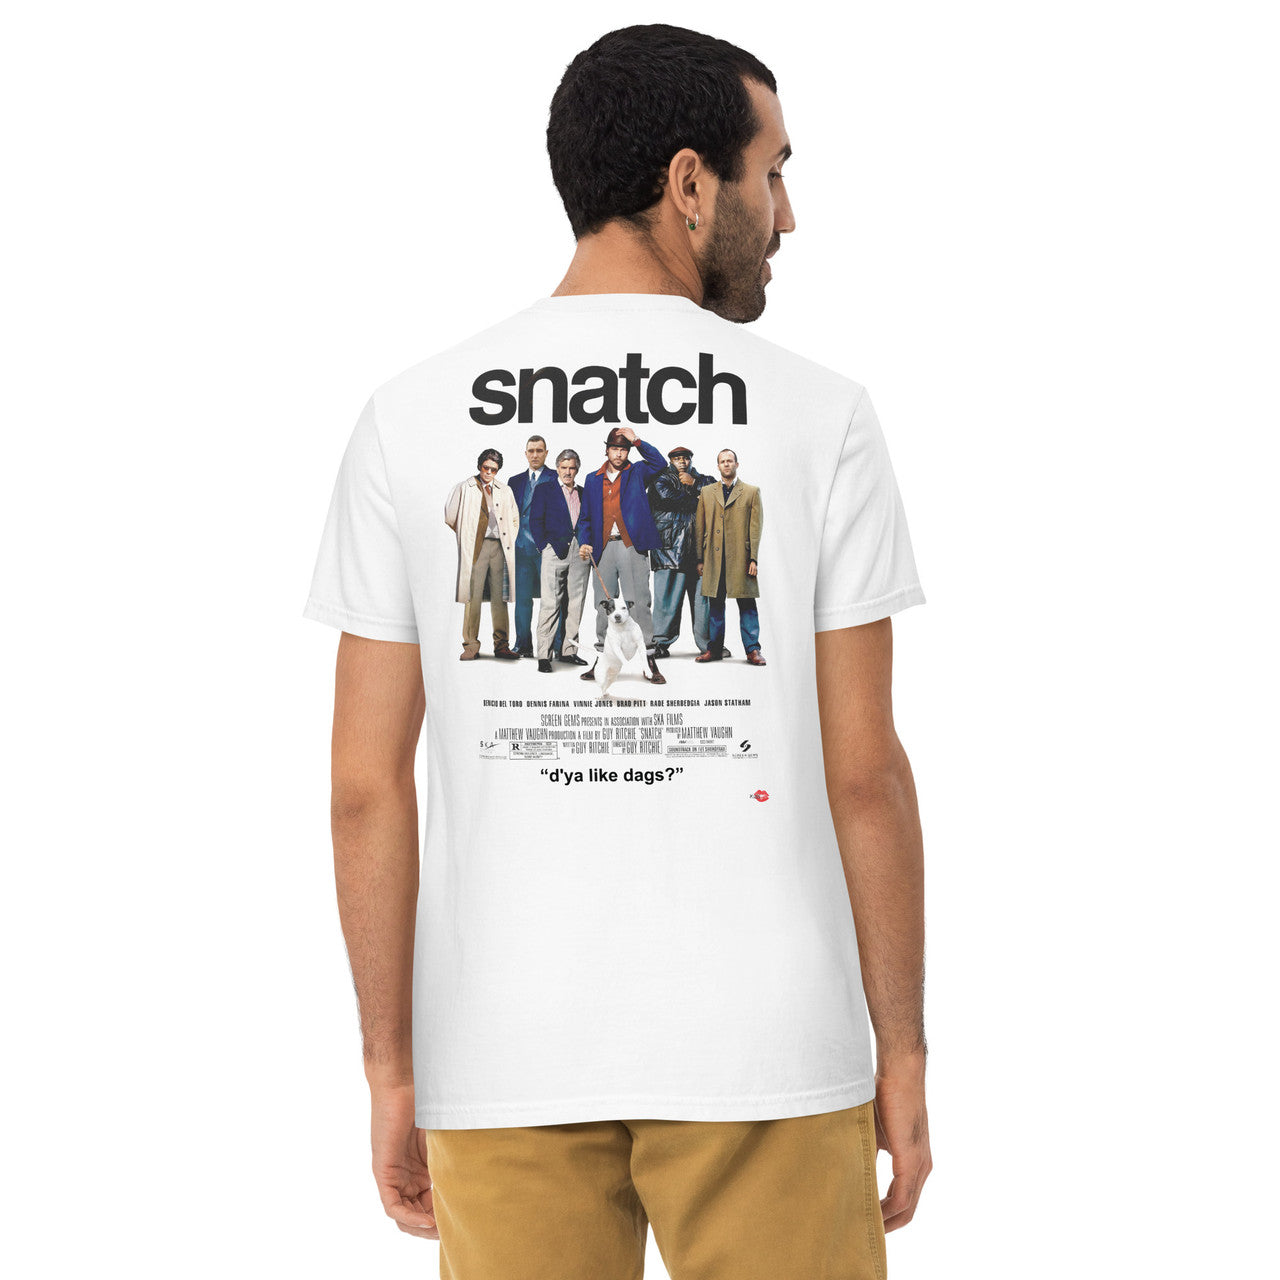 Snatch KiSS Unisex garment-dyed pocket t-shirt - Guy Ritchie movie inspired